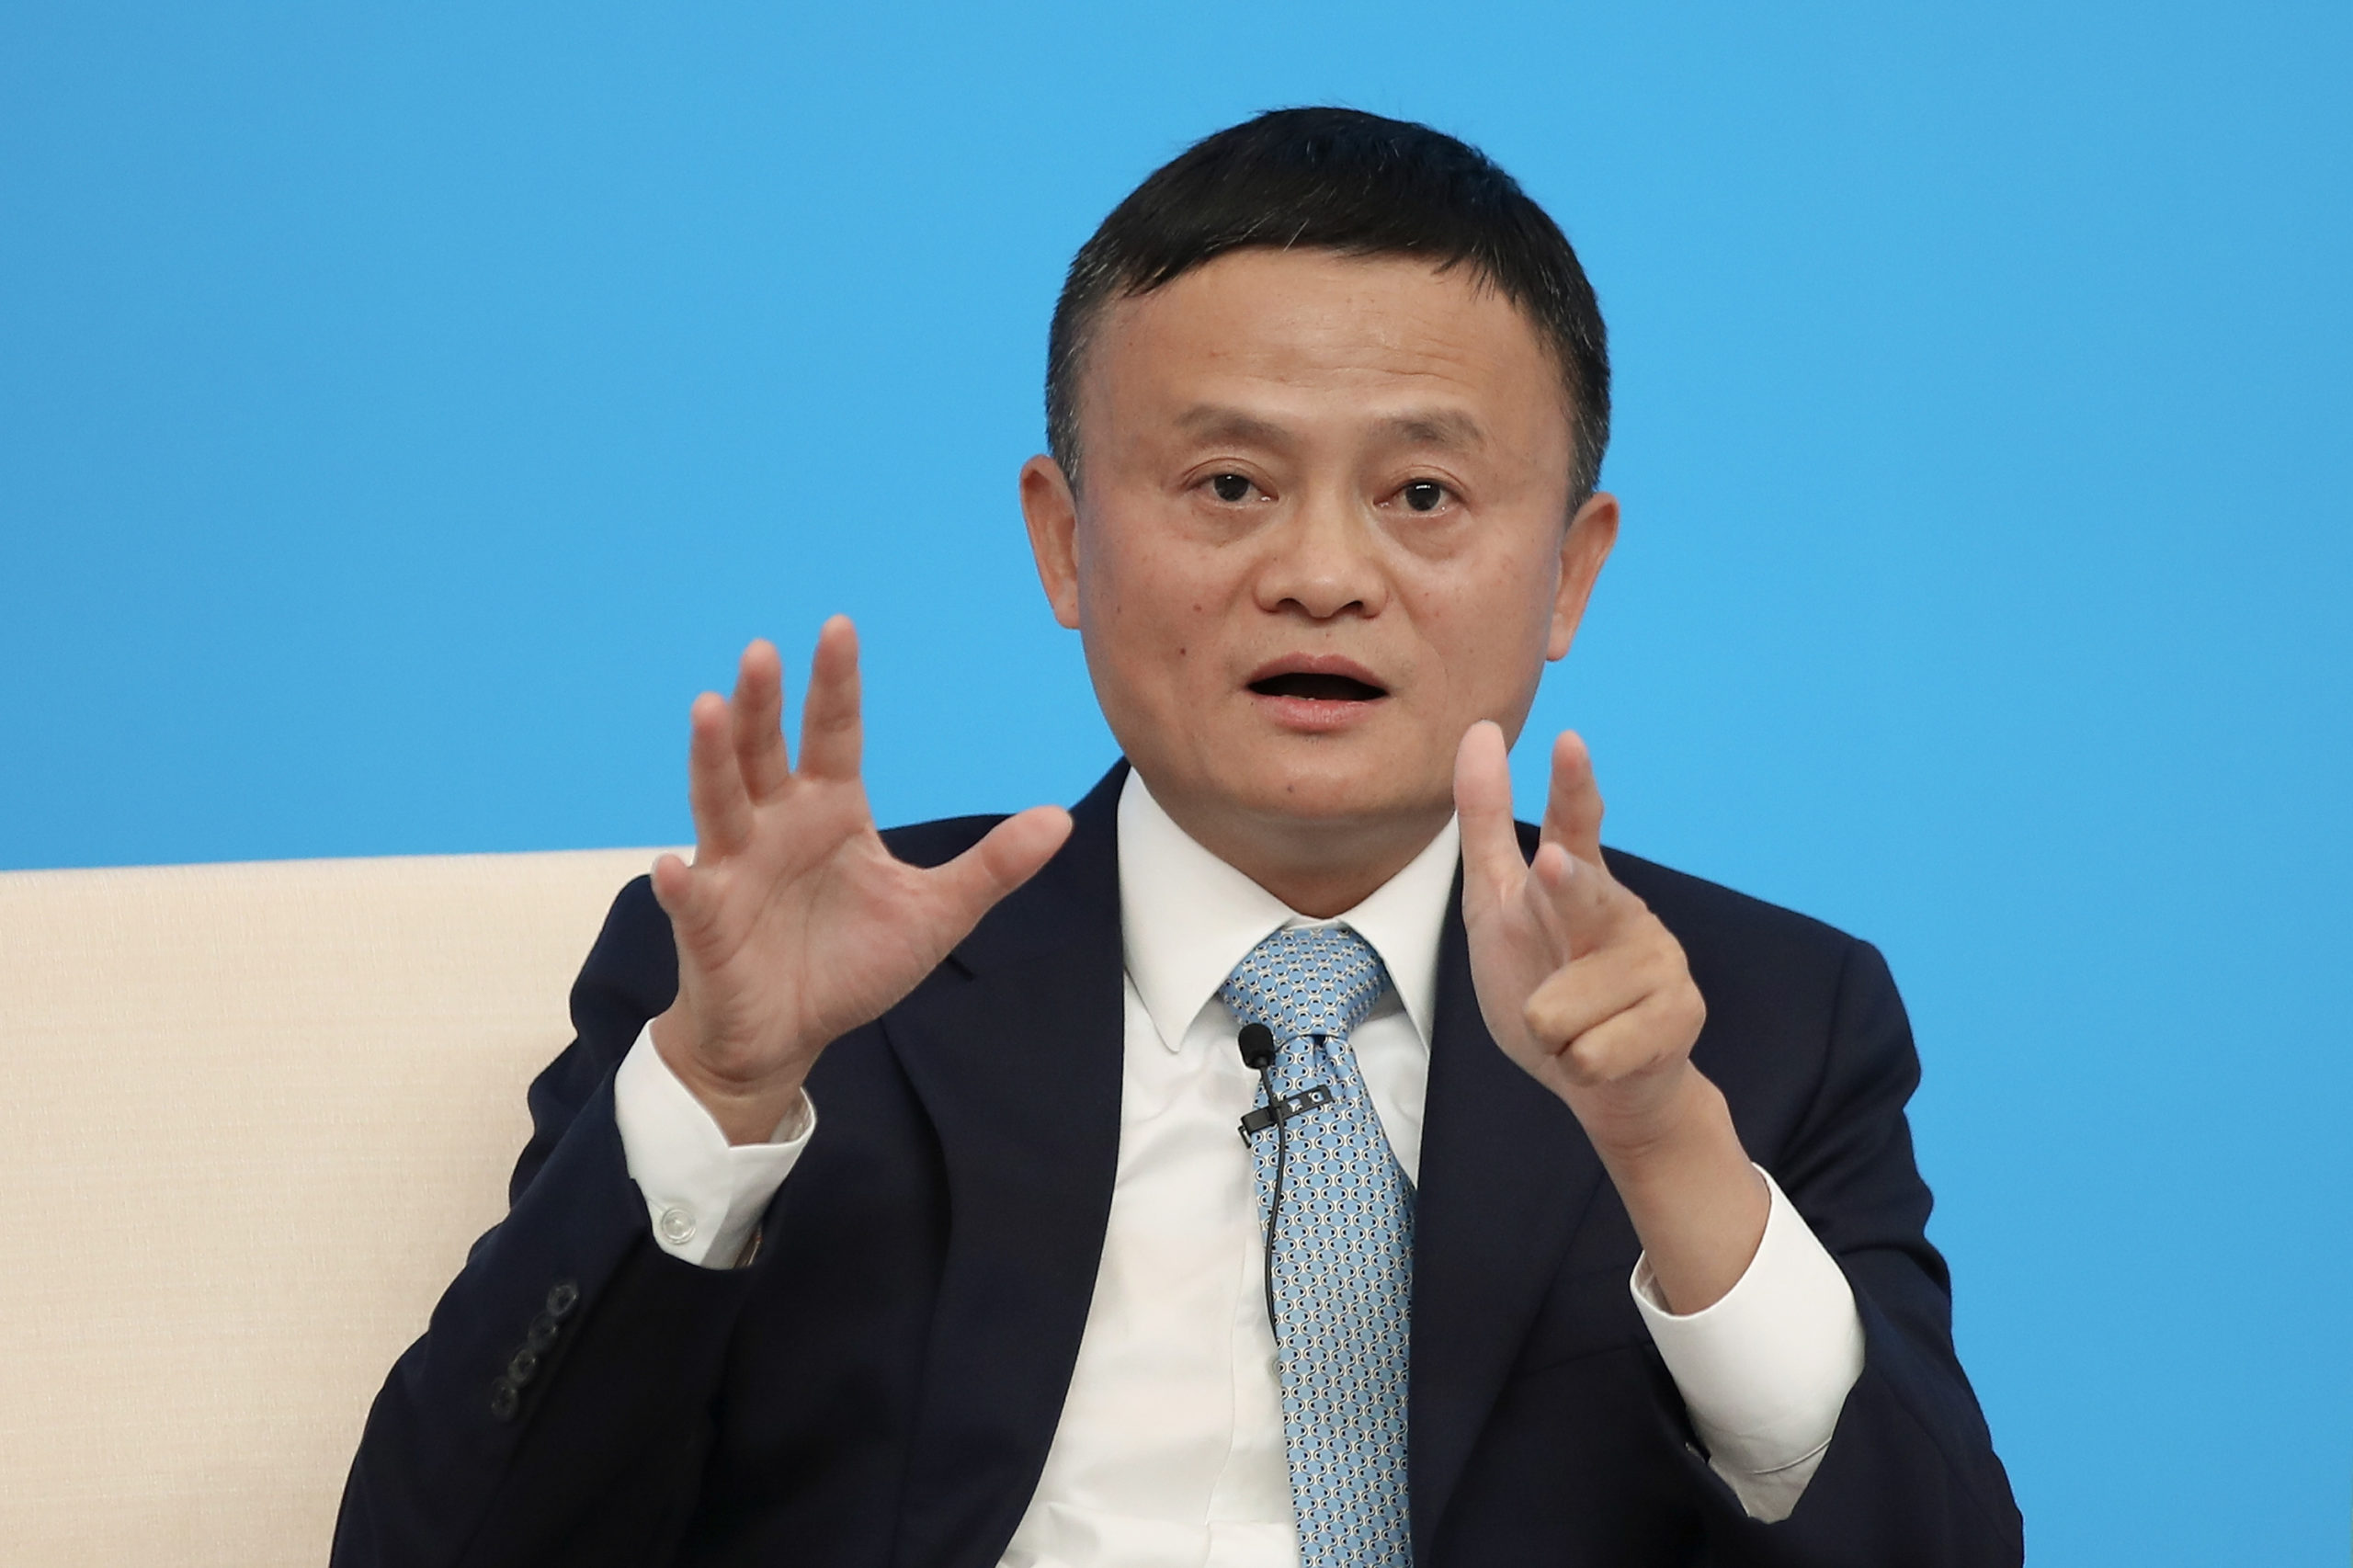 Jack Ma speaking duirng the Hongqiao International Economic and Trade Forum in the China International Import Expo at the National Exhibition and Convention Centre on November 5, 2018 in Shanghai, China. (Photo by Lintao Zhang/Getty Images)